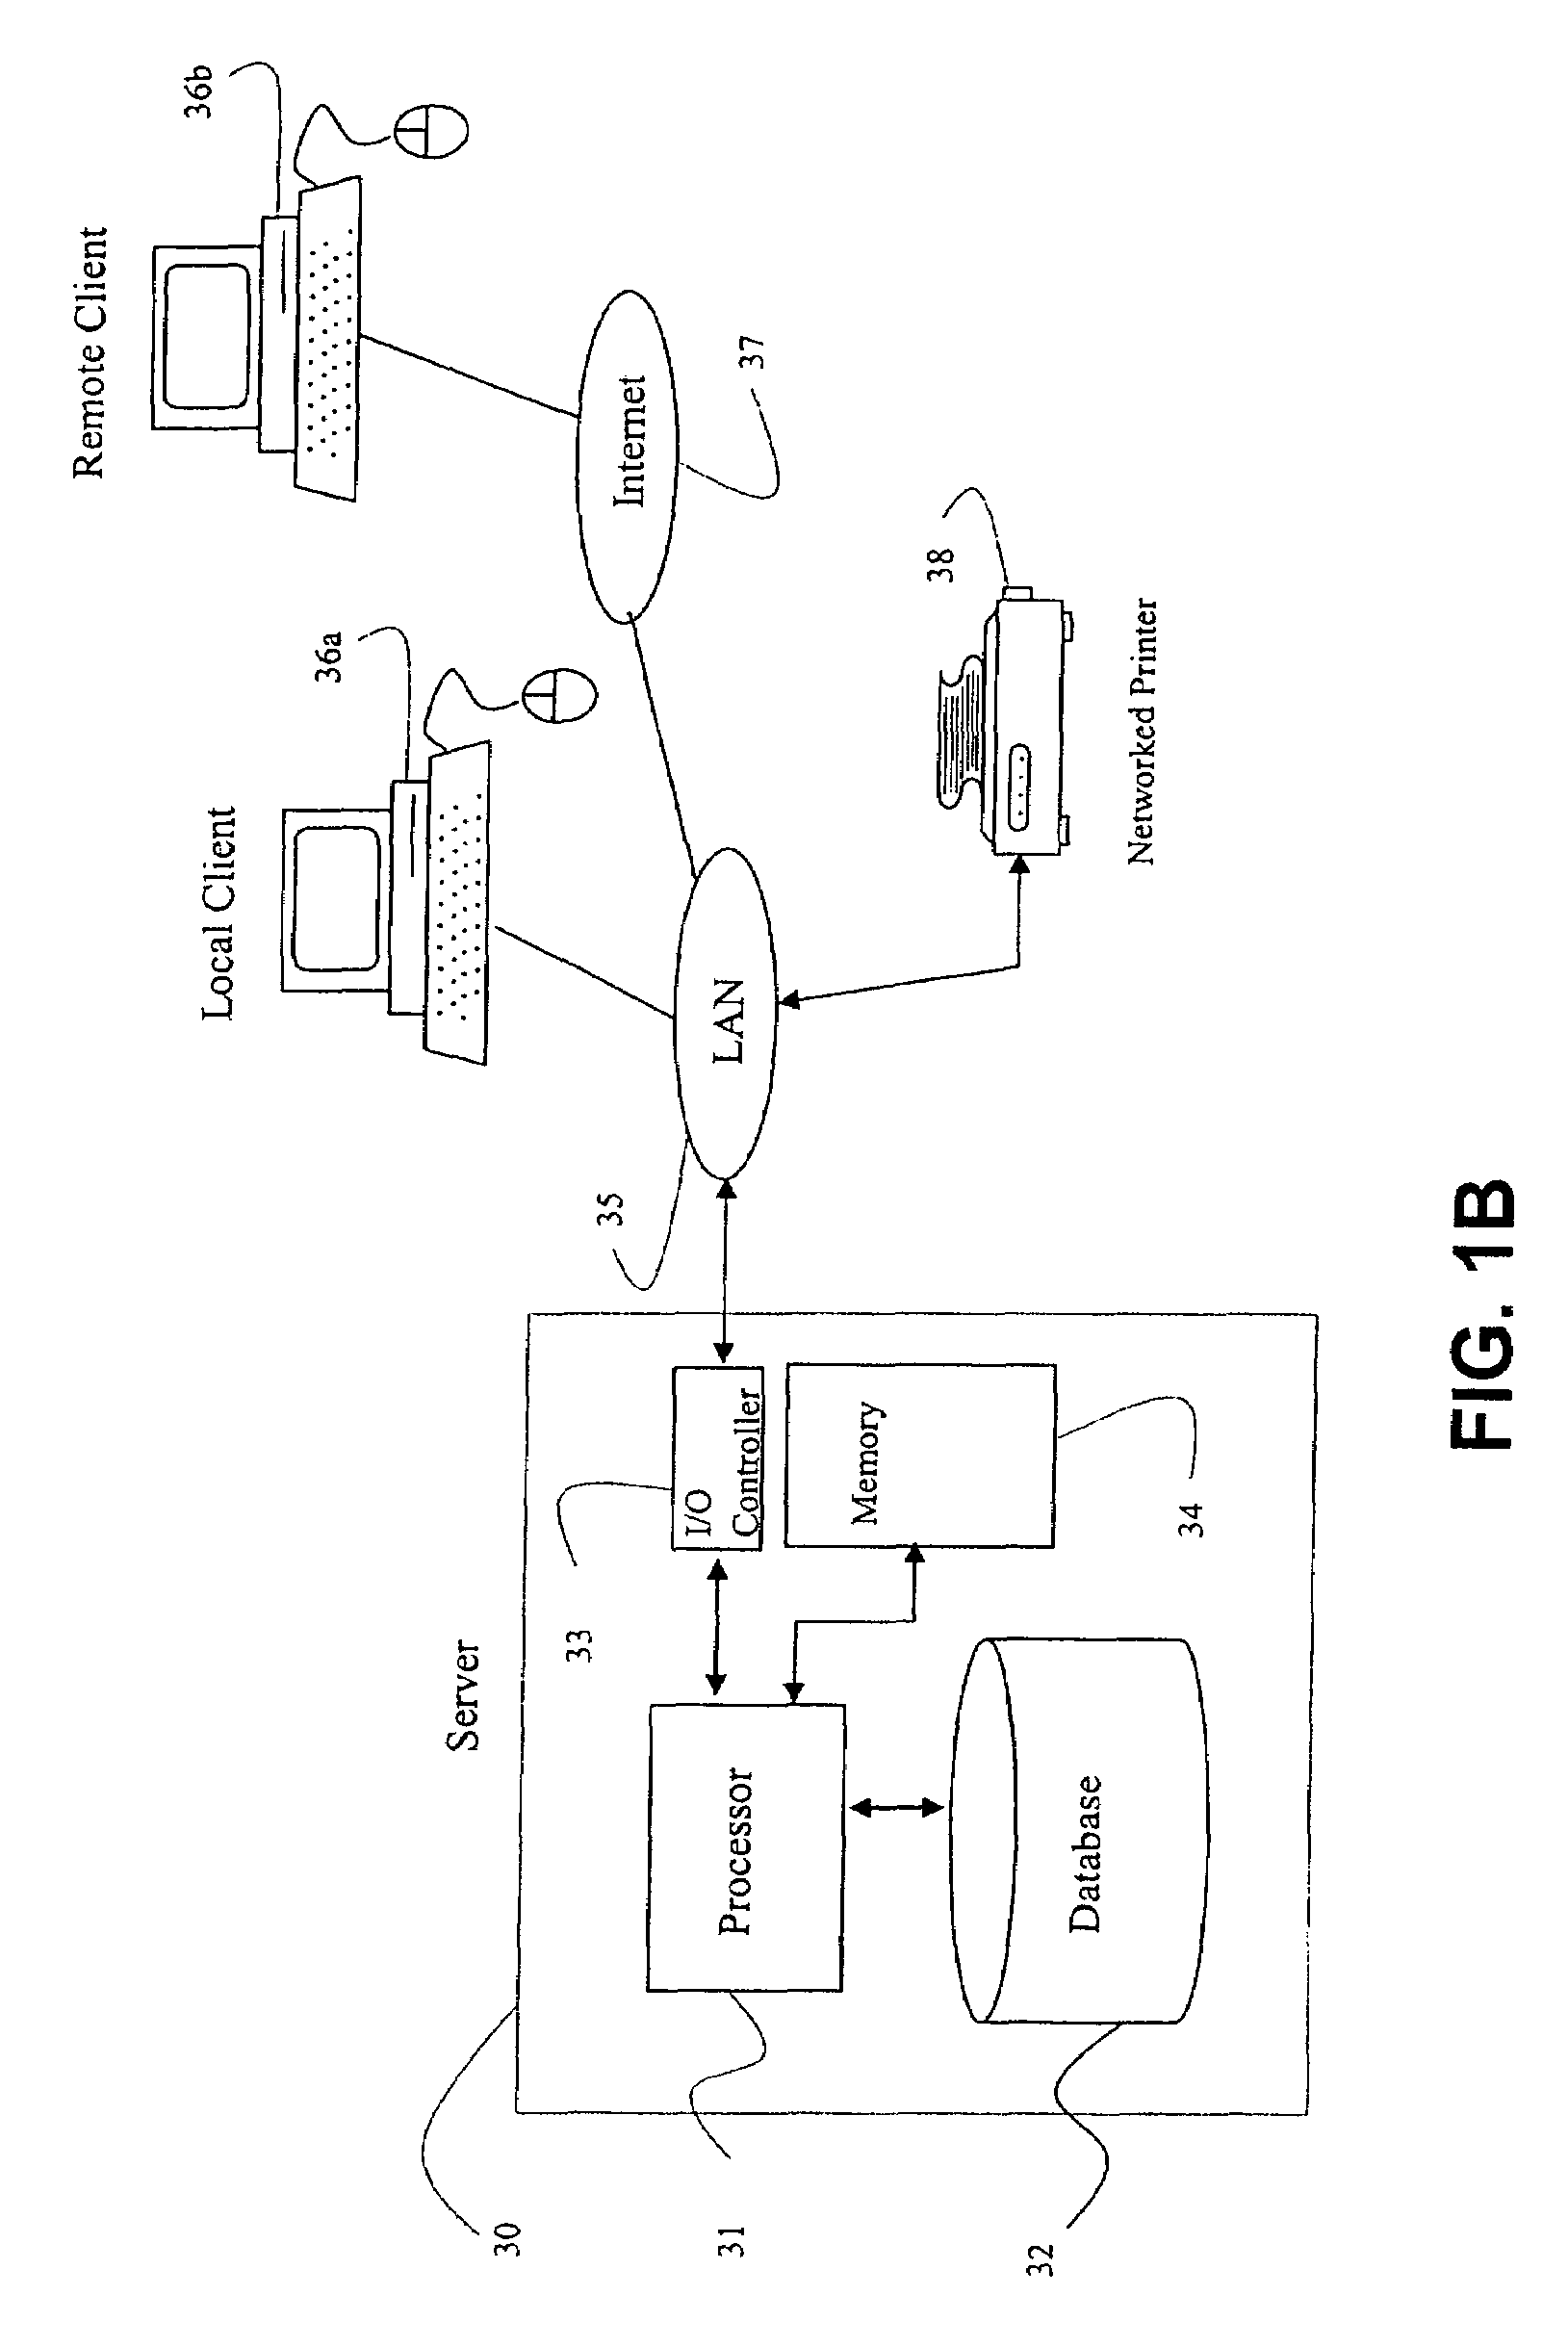 Method and computer program product for using data mining tools to automatically compare an investigated unit and a benchmark unit